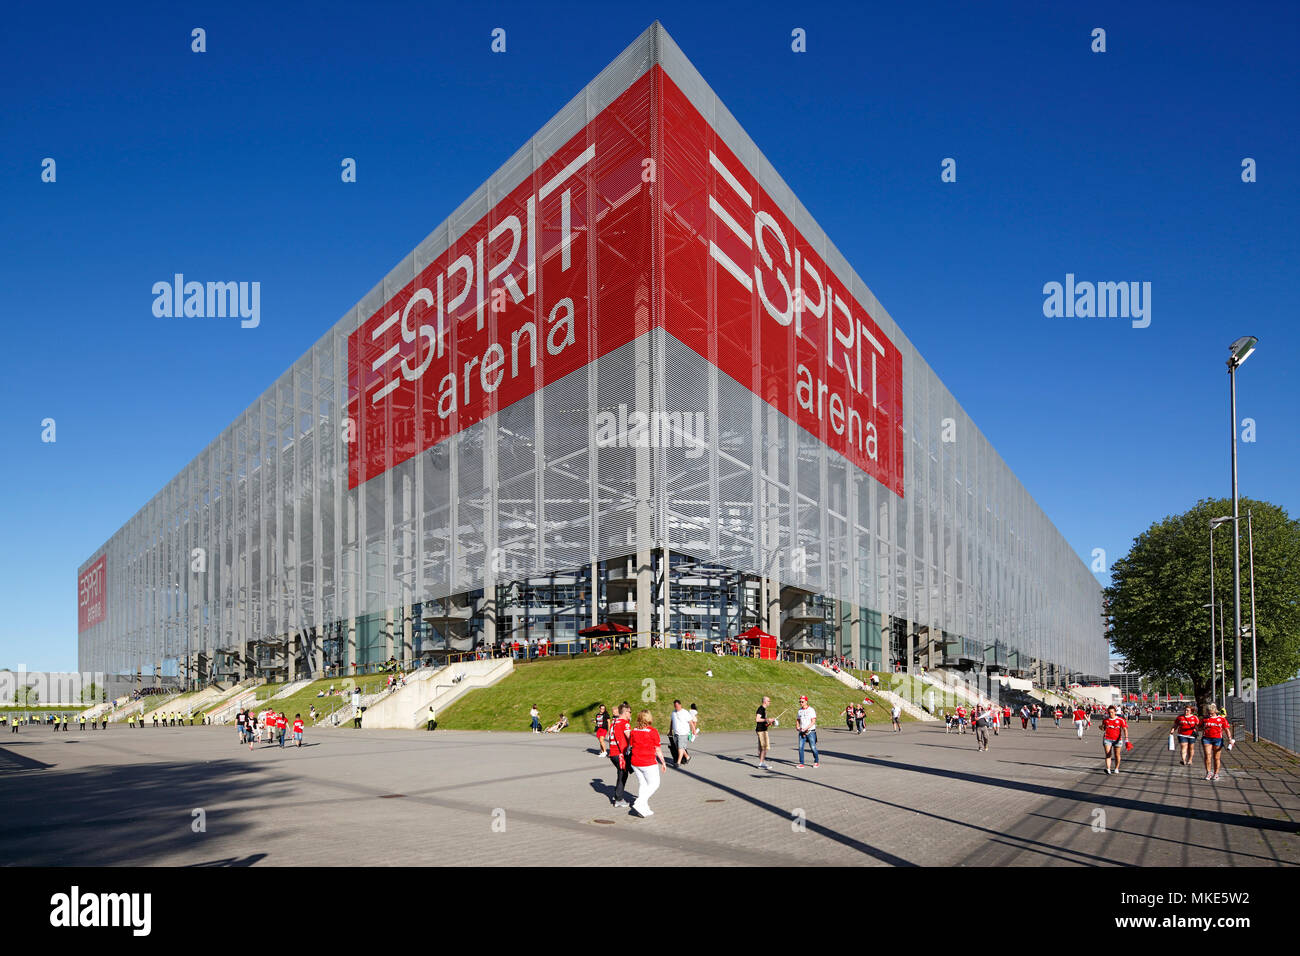 Ltu arena hi-res stock photography and images - Alamy